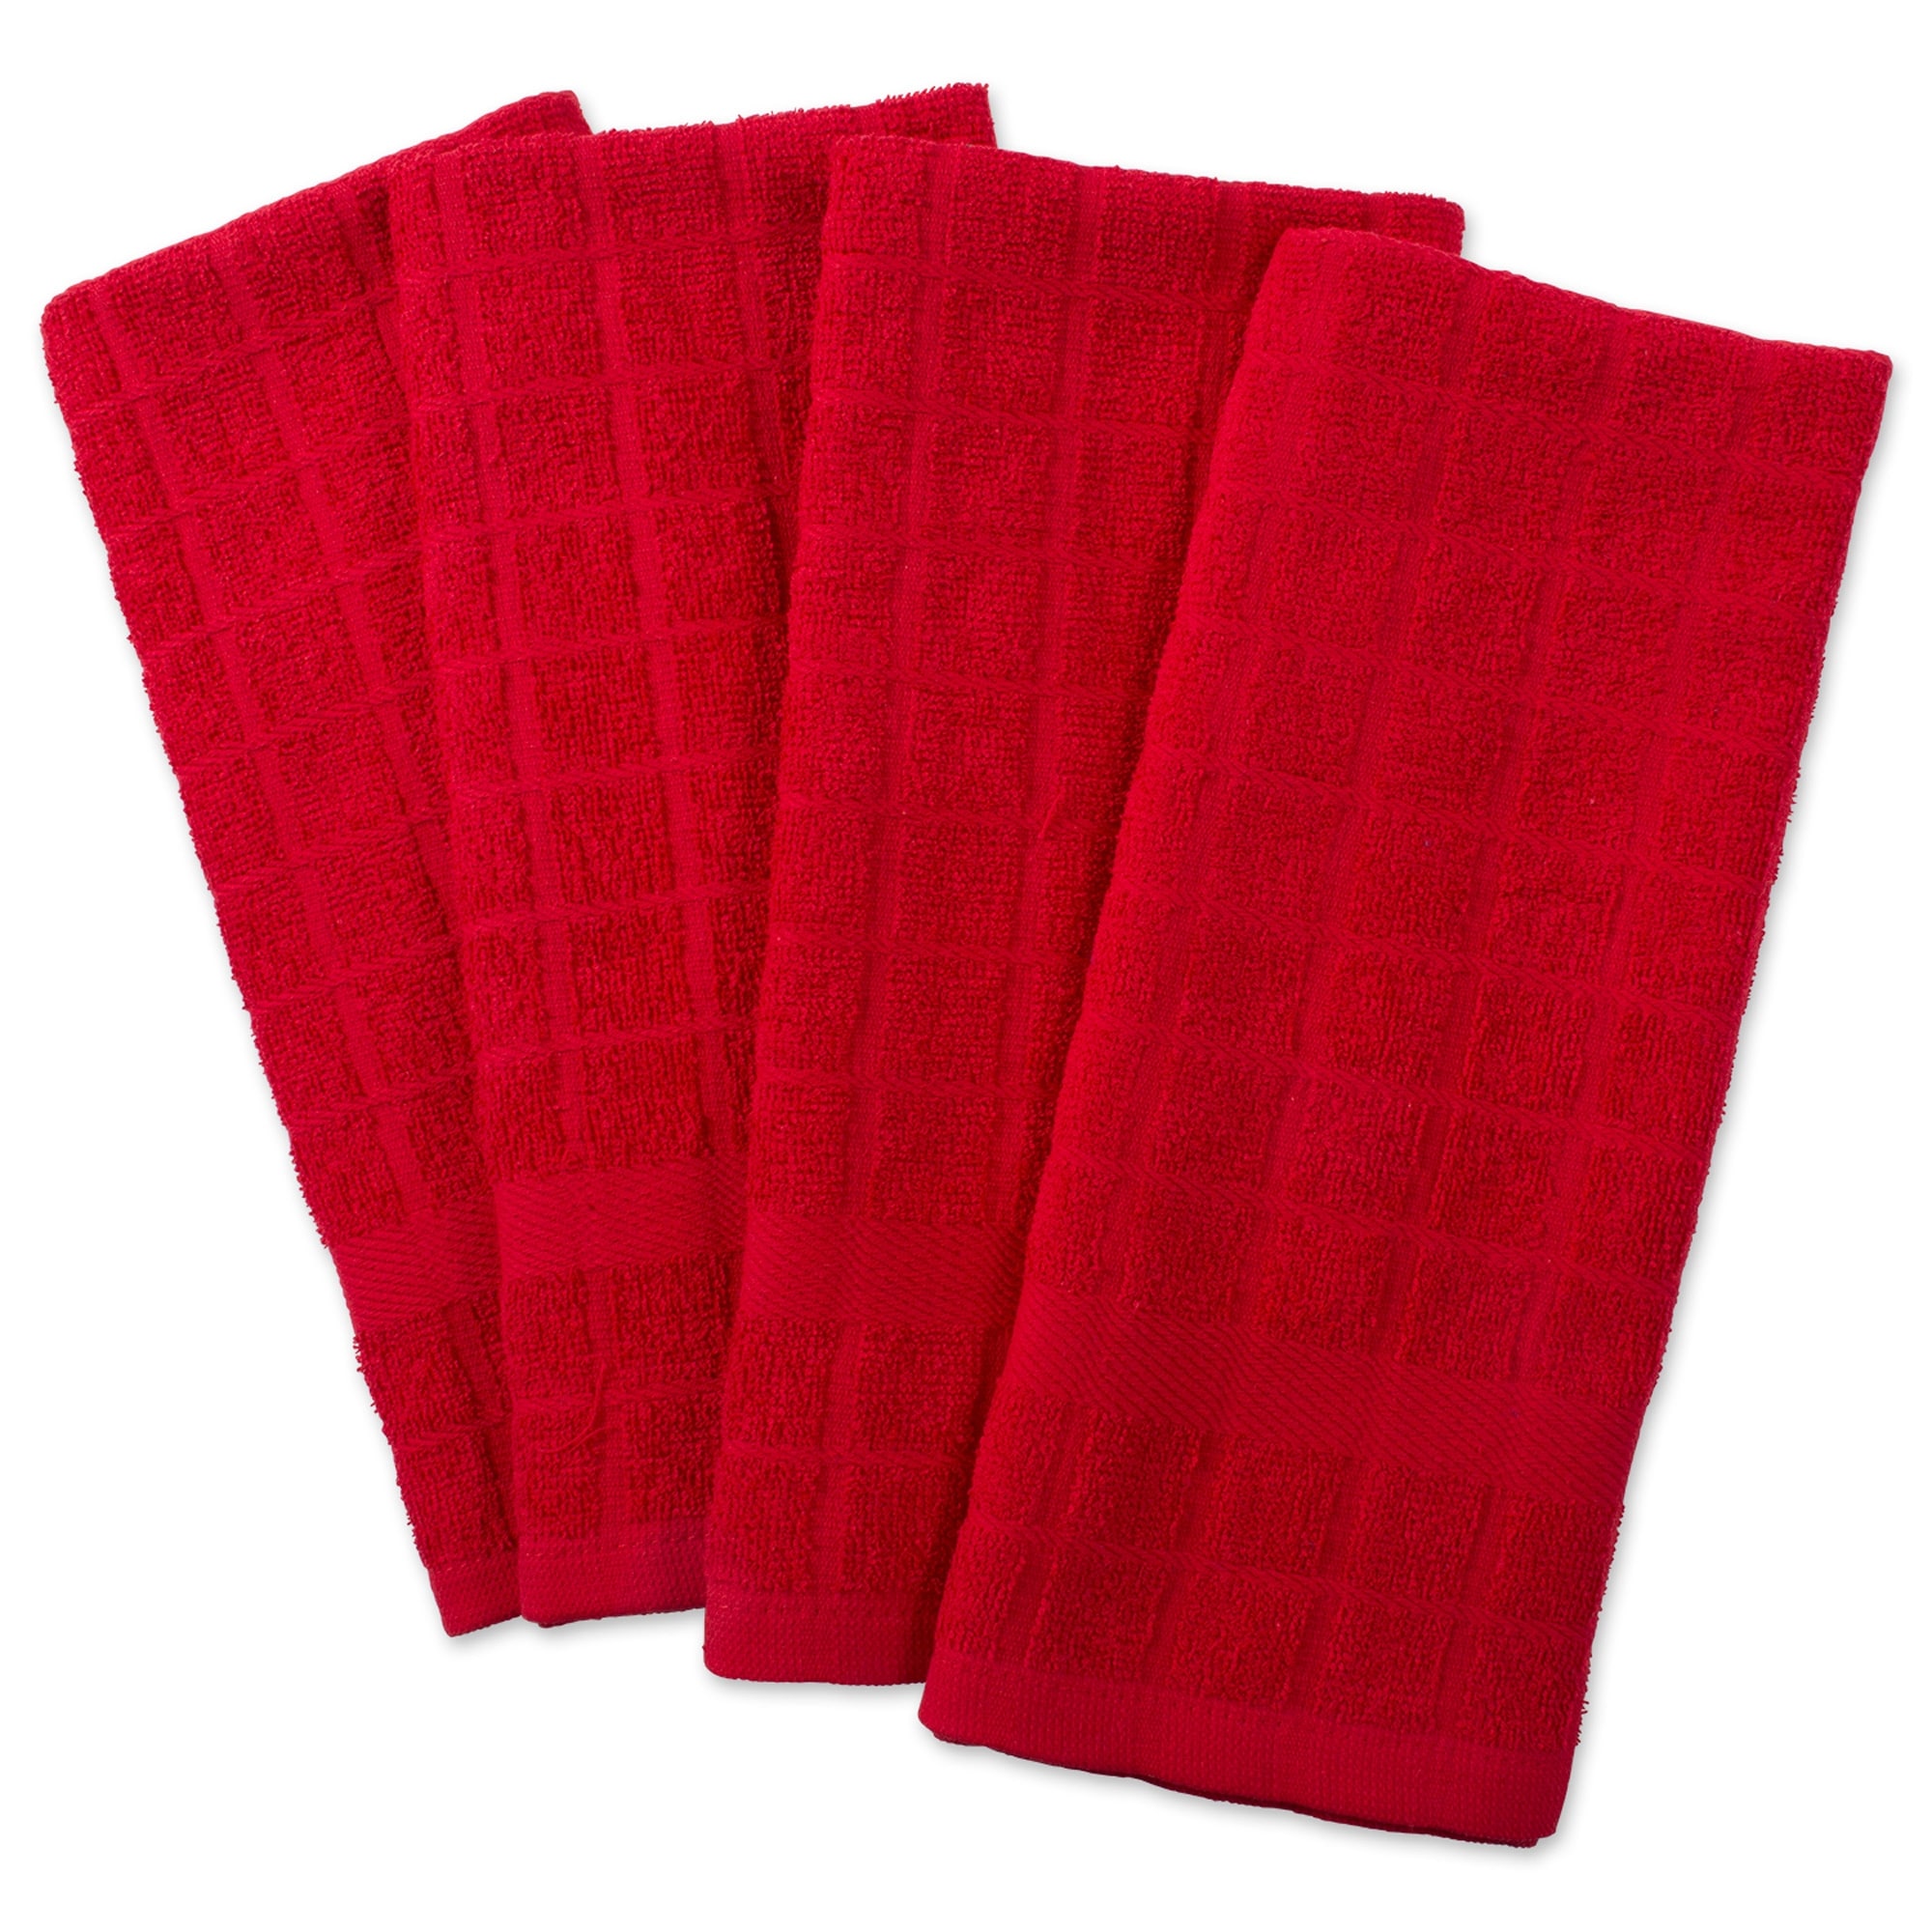 https://ak1.ostkcdn.com/images/products/is/images/direct/fcea7585c9c33dcfe993b4937d402efd21f61cb9/Set-of-4-Solid-Red-Terry-Dish-Towel%2C-26%22.jpg